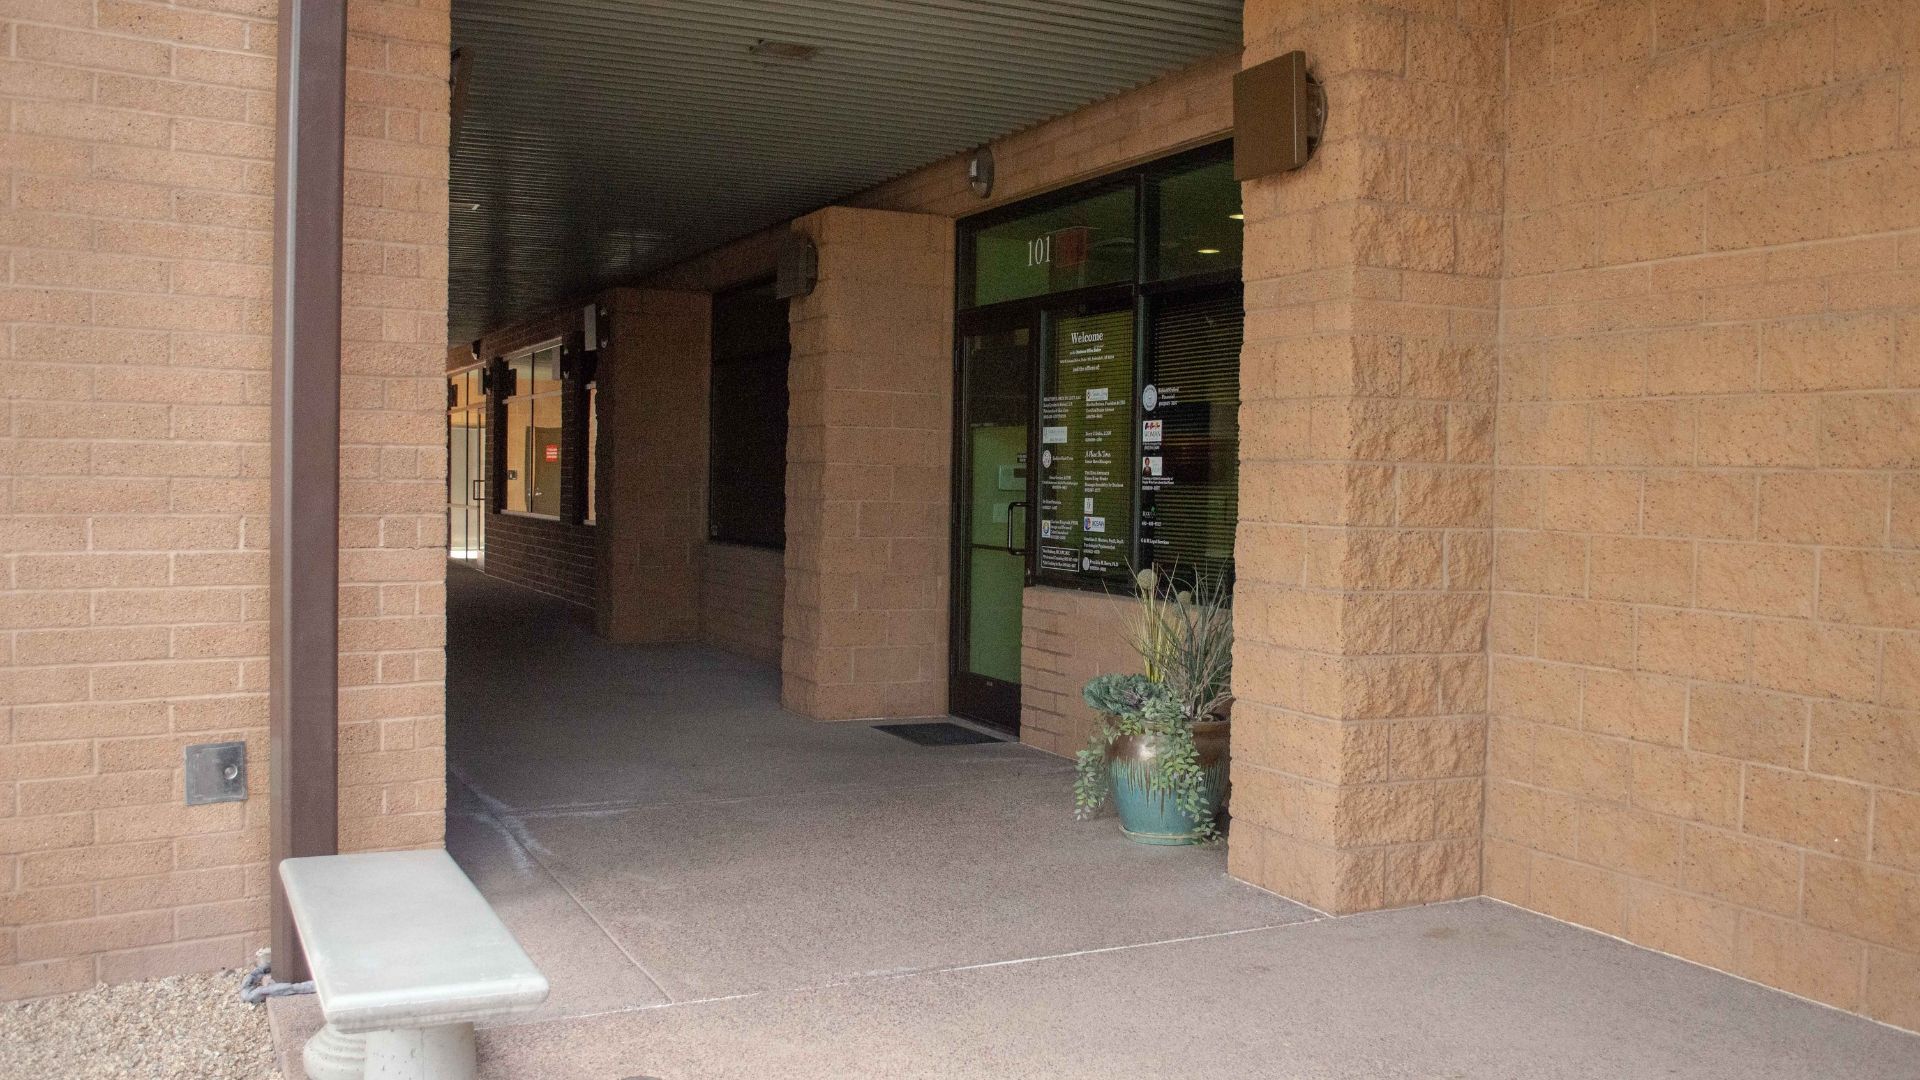 Scottsdale Law Firm - Hallway View From Back Parking Lot - The Arizona Law Doctor